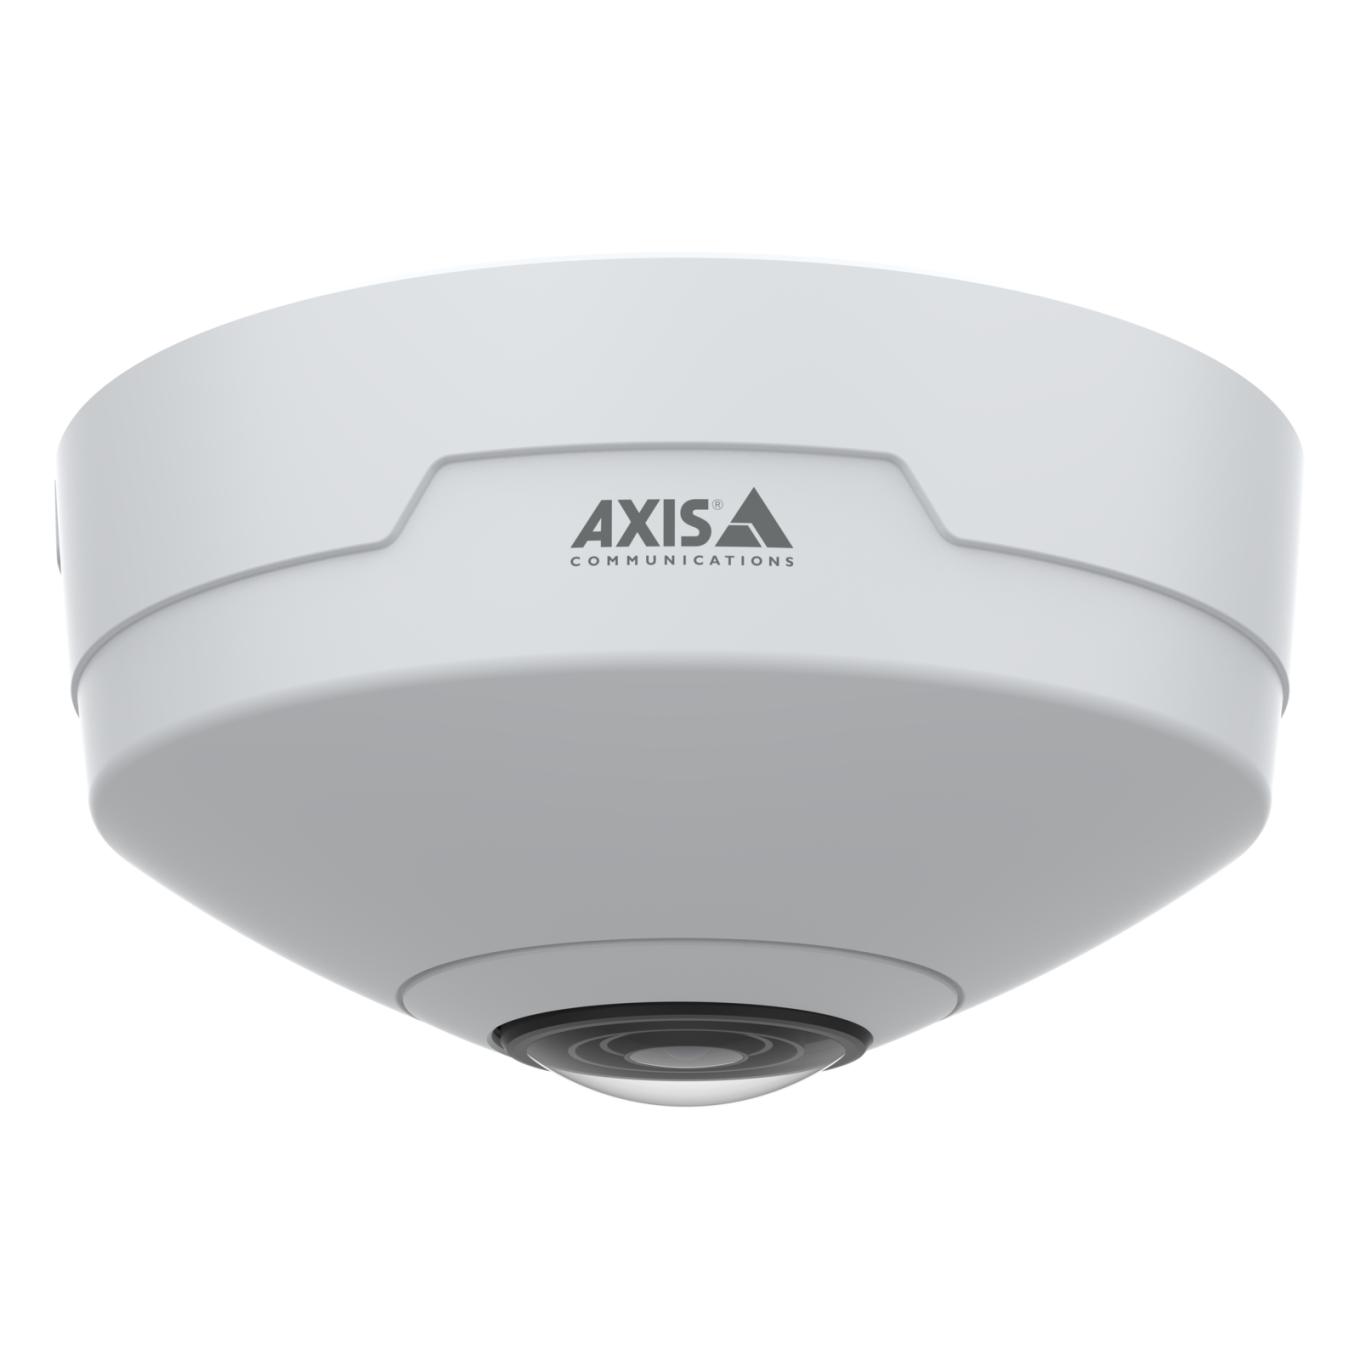 AXIS M4327-P Panoramic Camera | Axis Communications